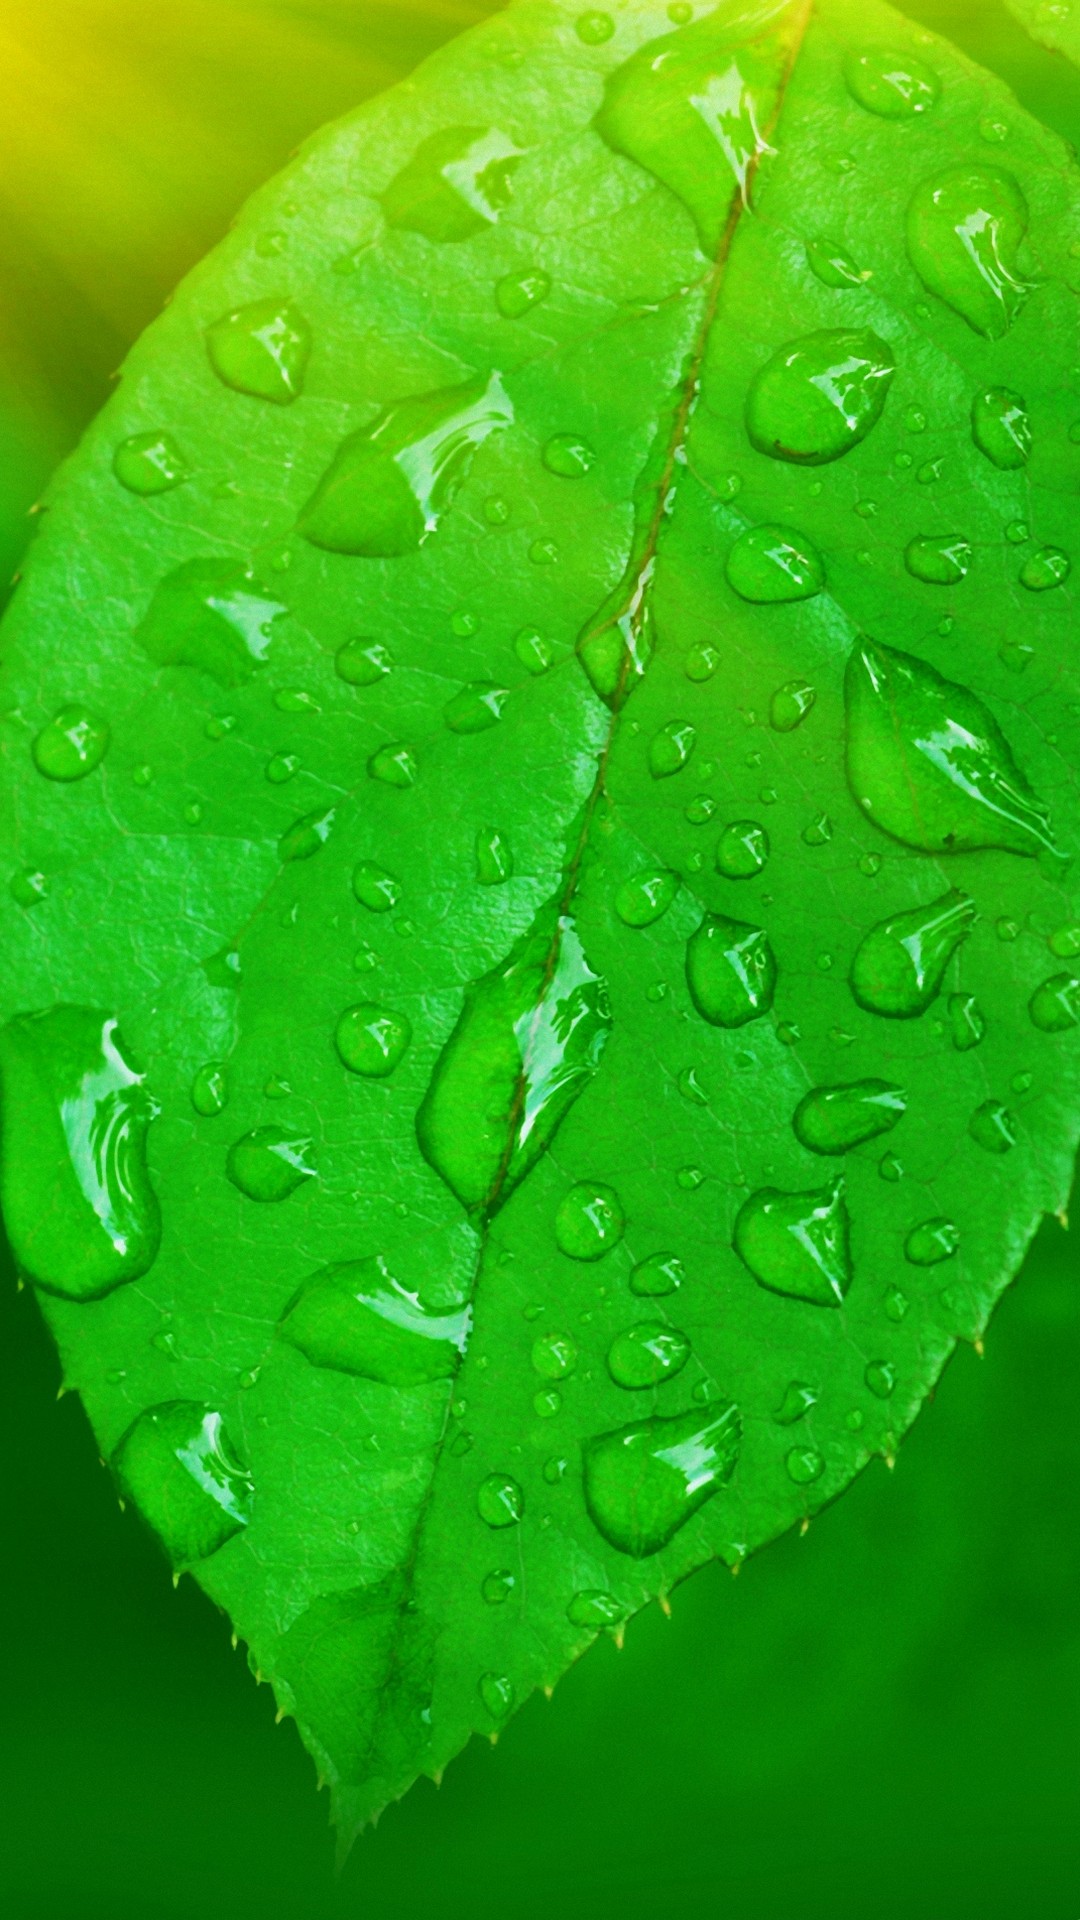 Leaf Android Wallpaper with HD resolution 1080x1920